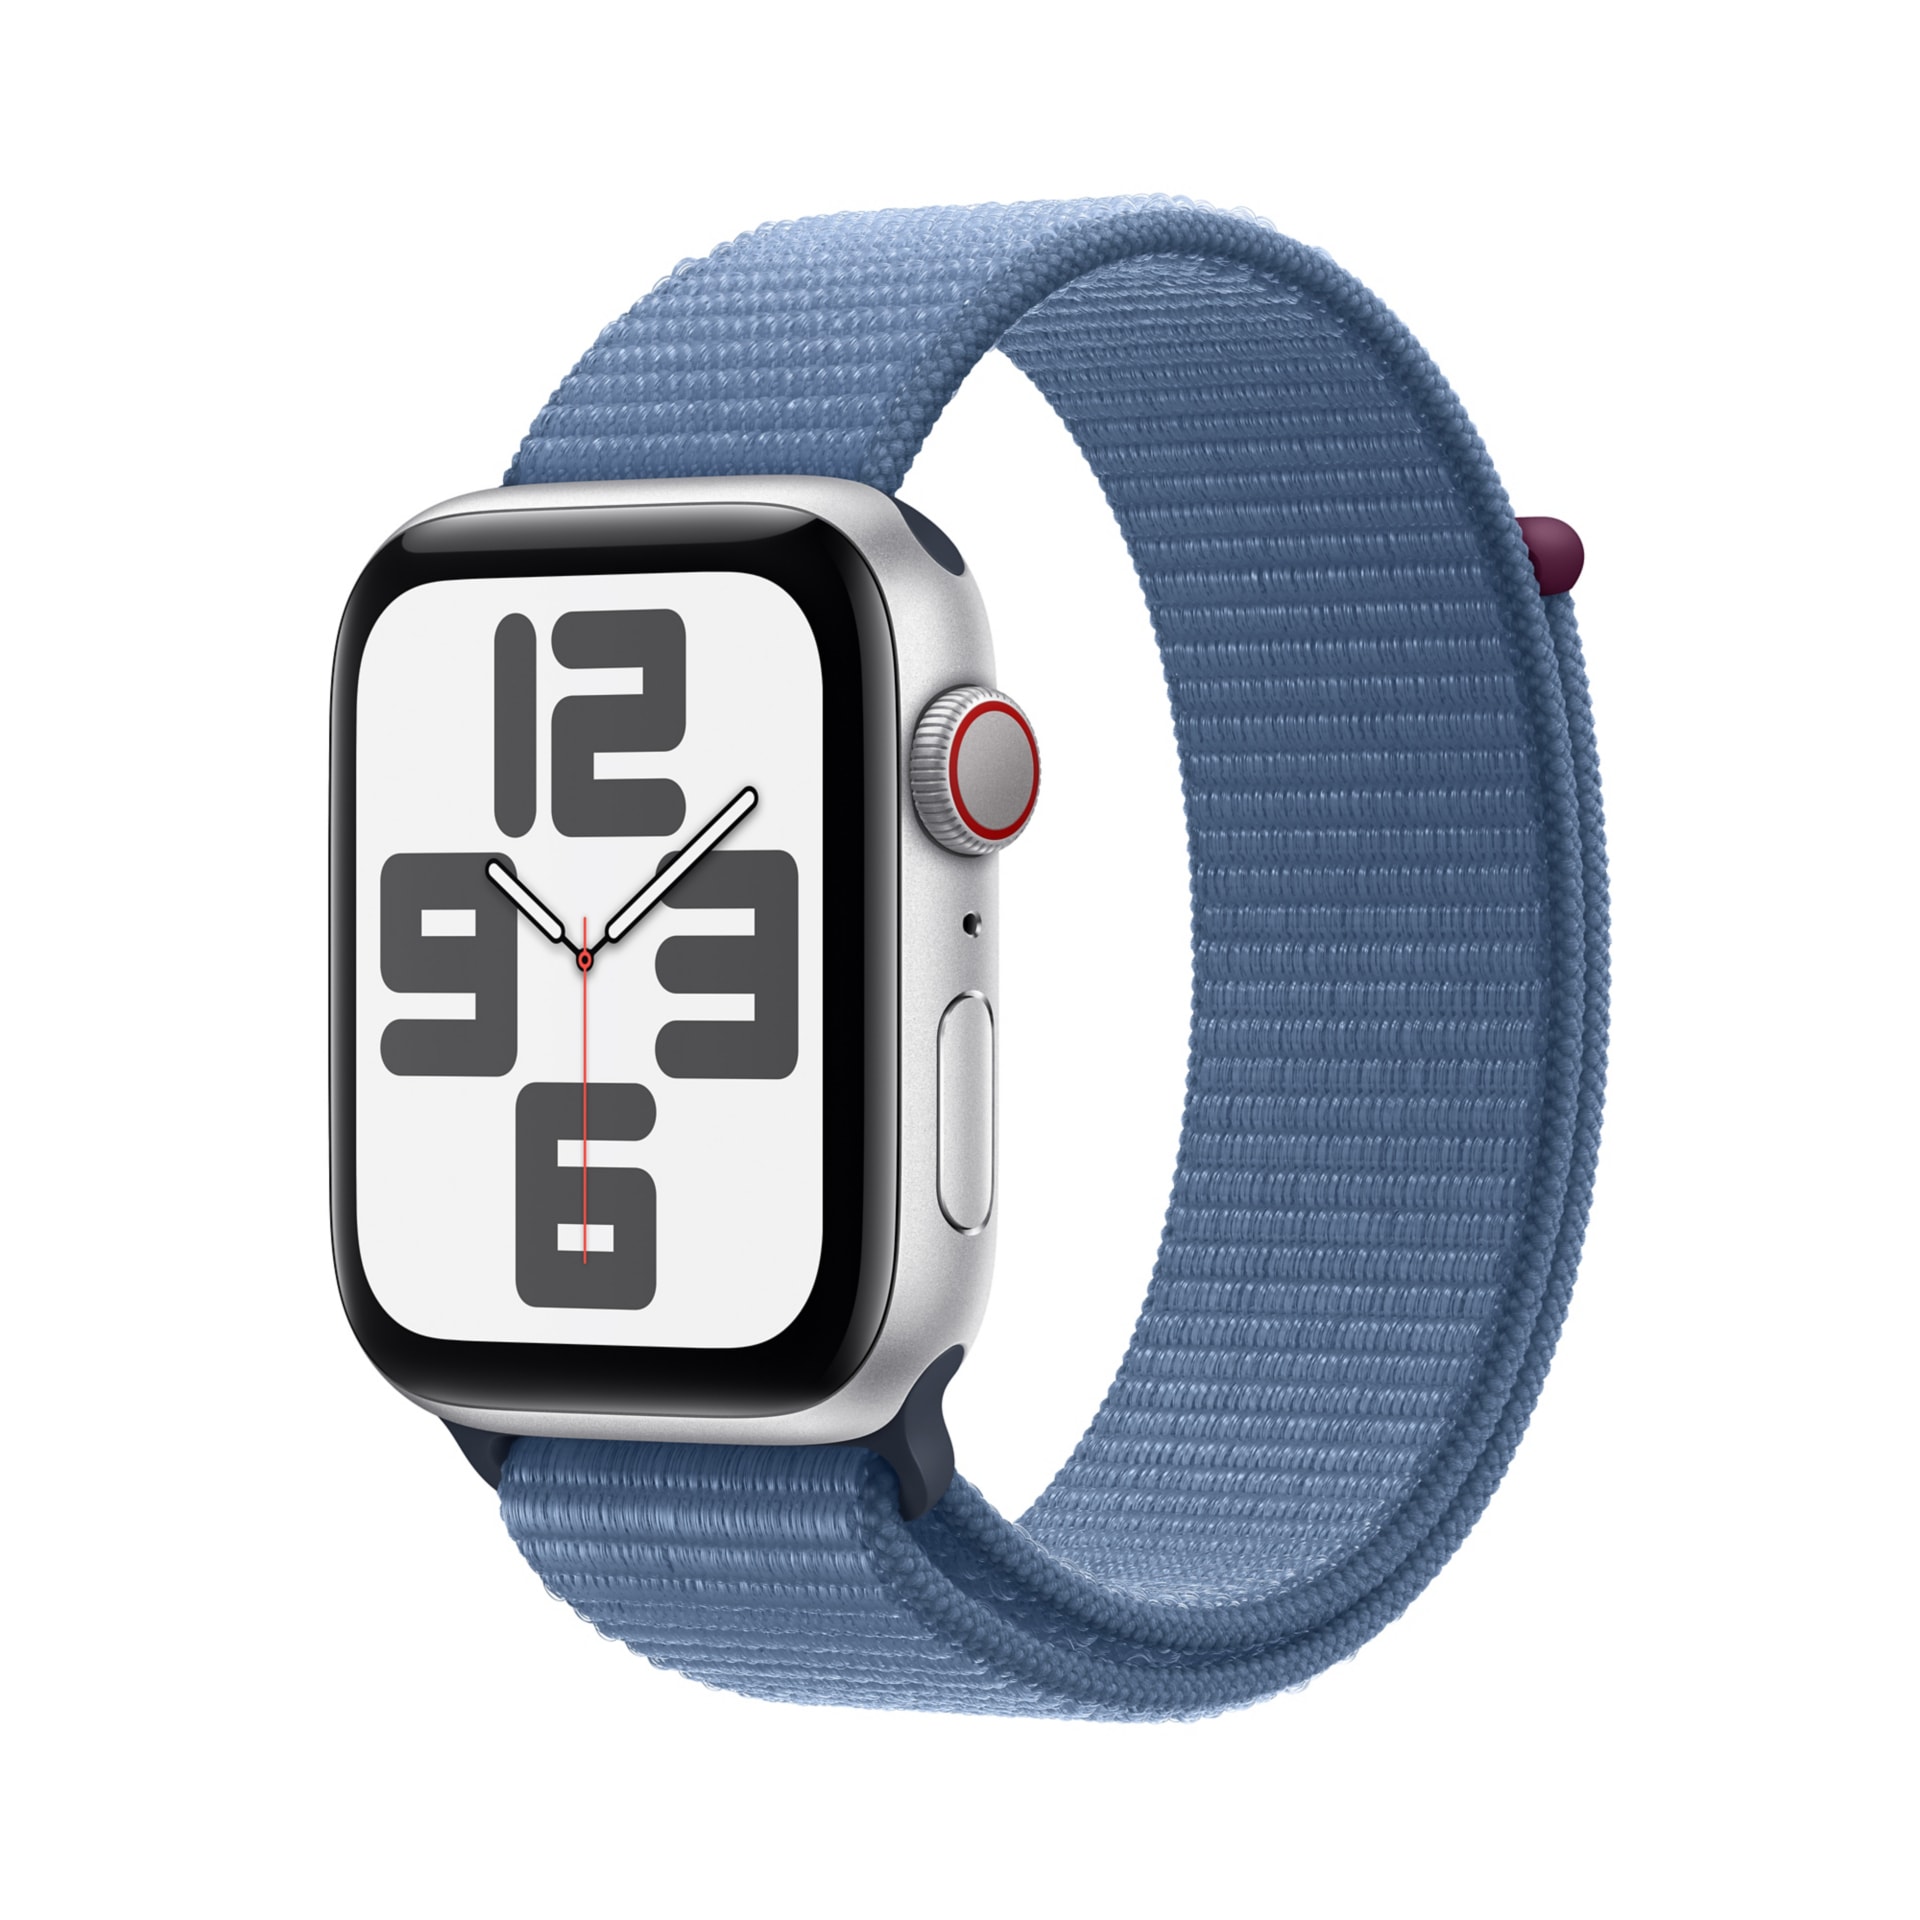 Apple Watch SE 2nd generation (GPS + Cellular) - 44mm Silver Aluminum Case with Winter Blue Sport Loop - 32 GB